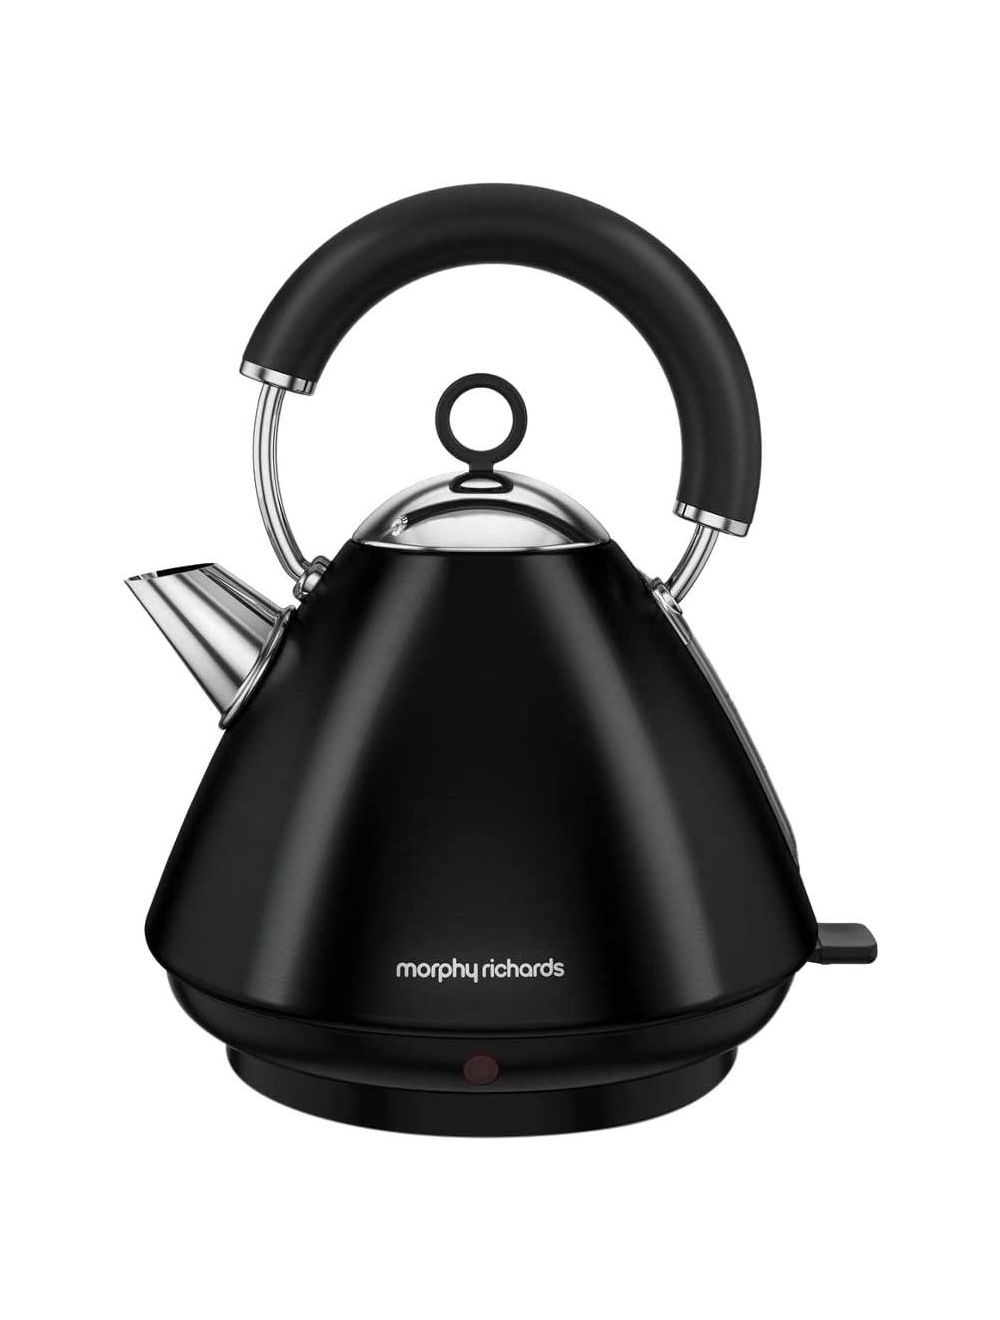 Morphy Richards Accents Pyramid Kettle - Black-102030